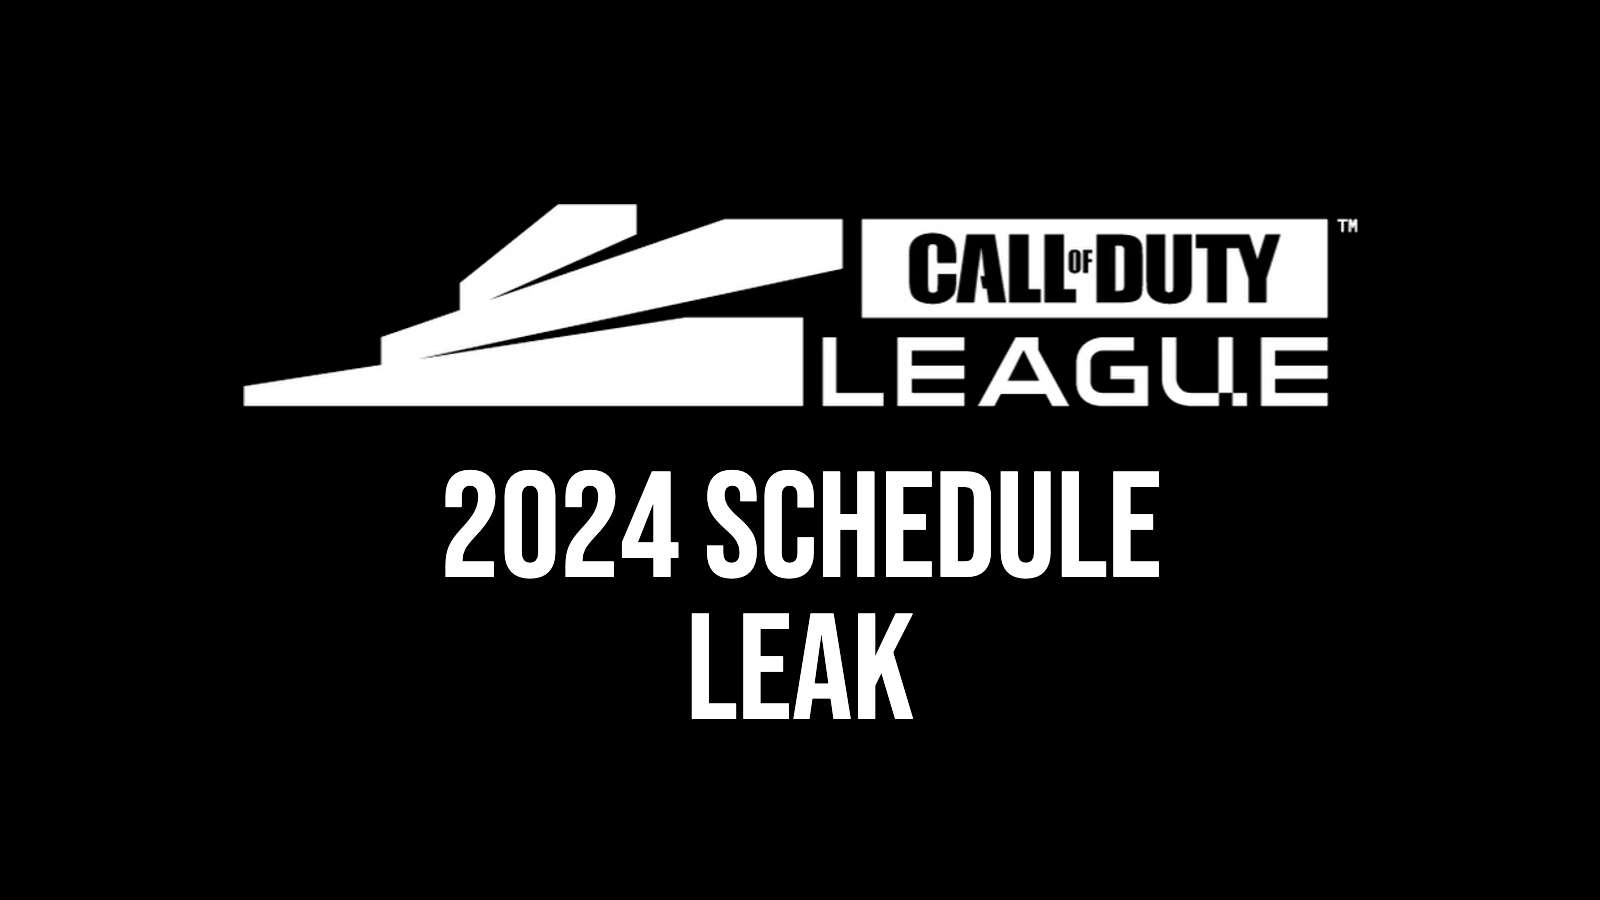 Call of Duty League logo with text underneath saying '2024 schedule leak'